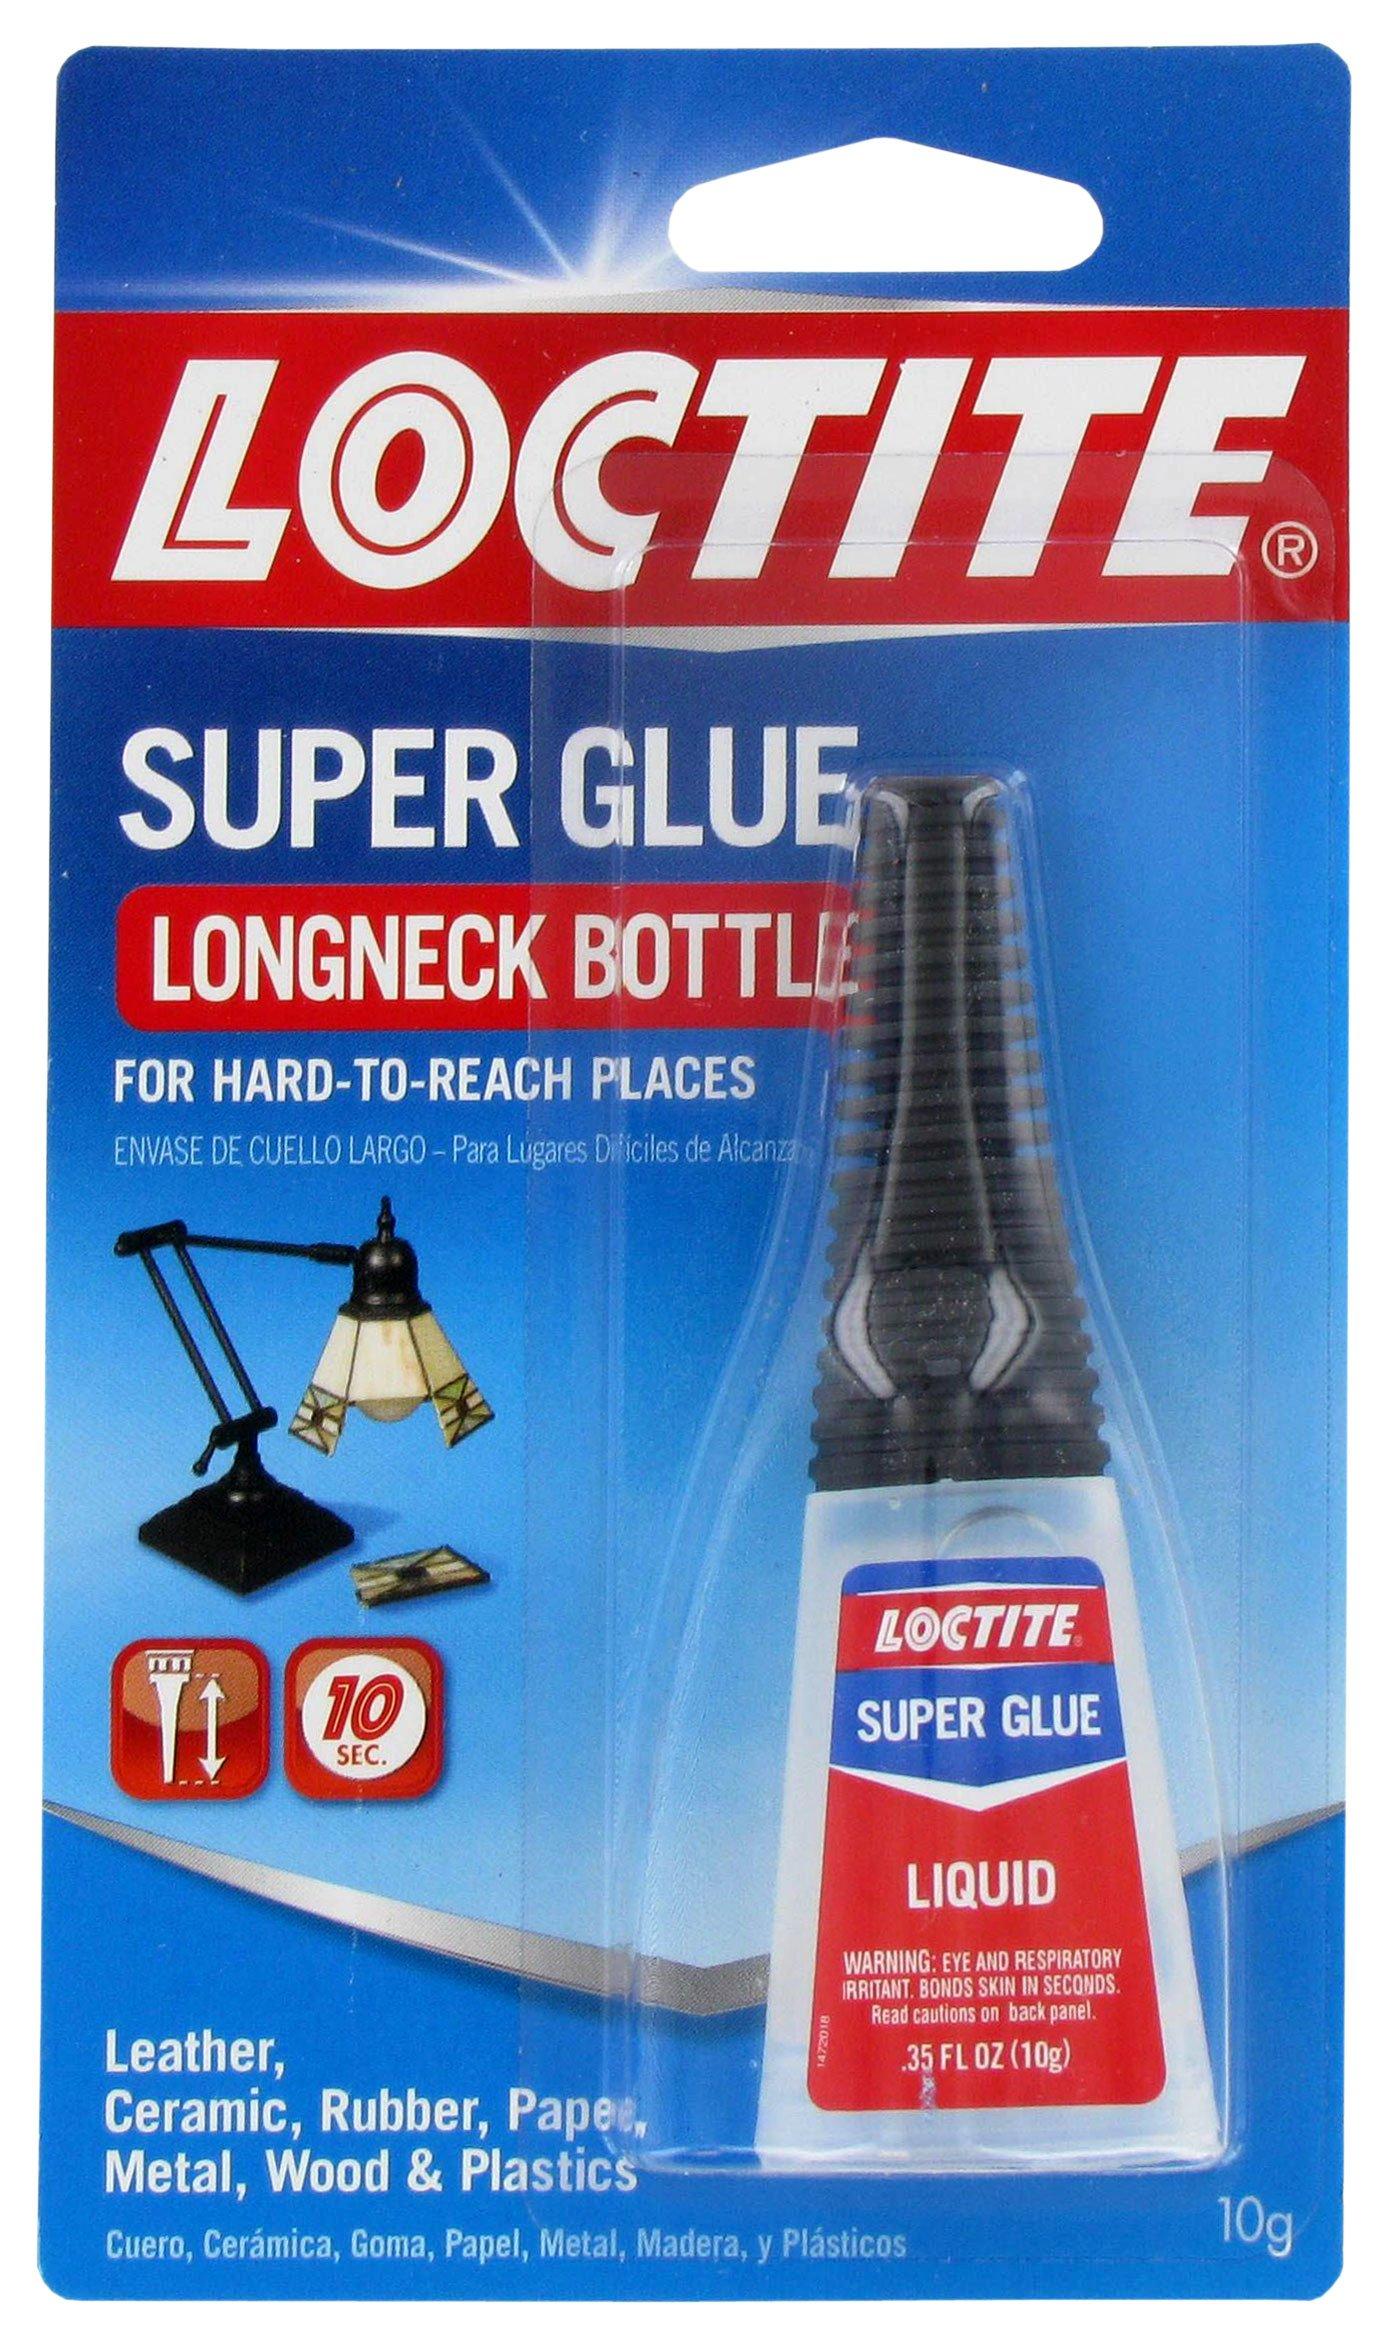 Loctite SuperGlue Bottle For Hard-To-Reach Places